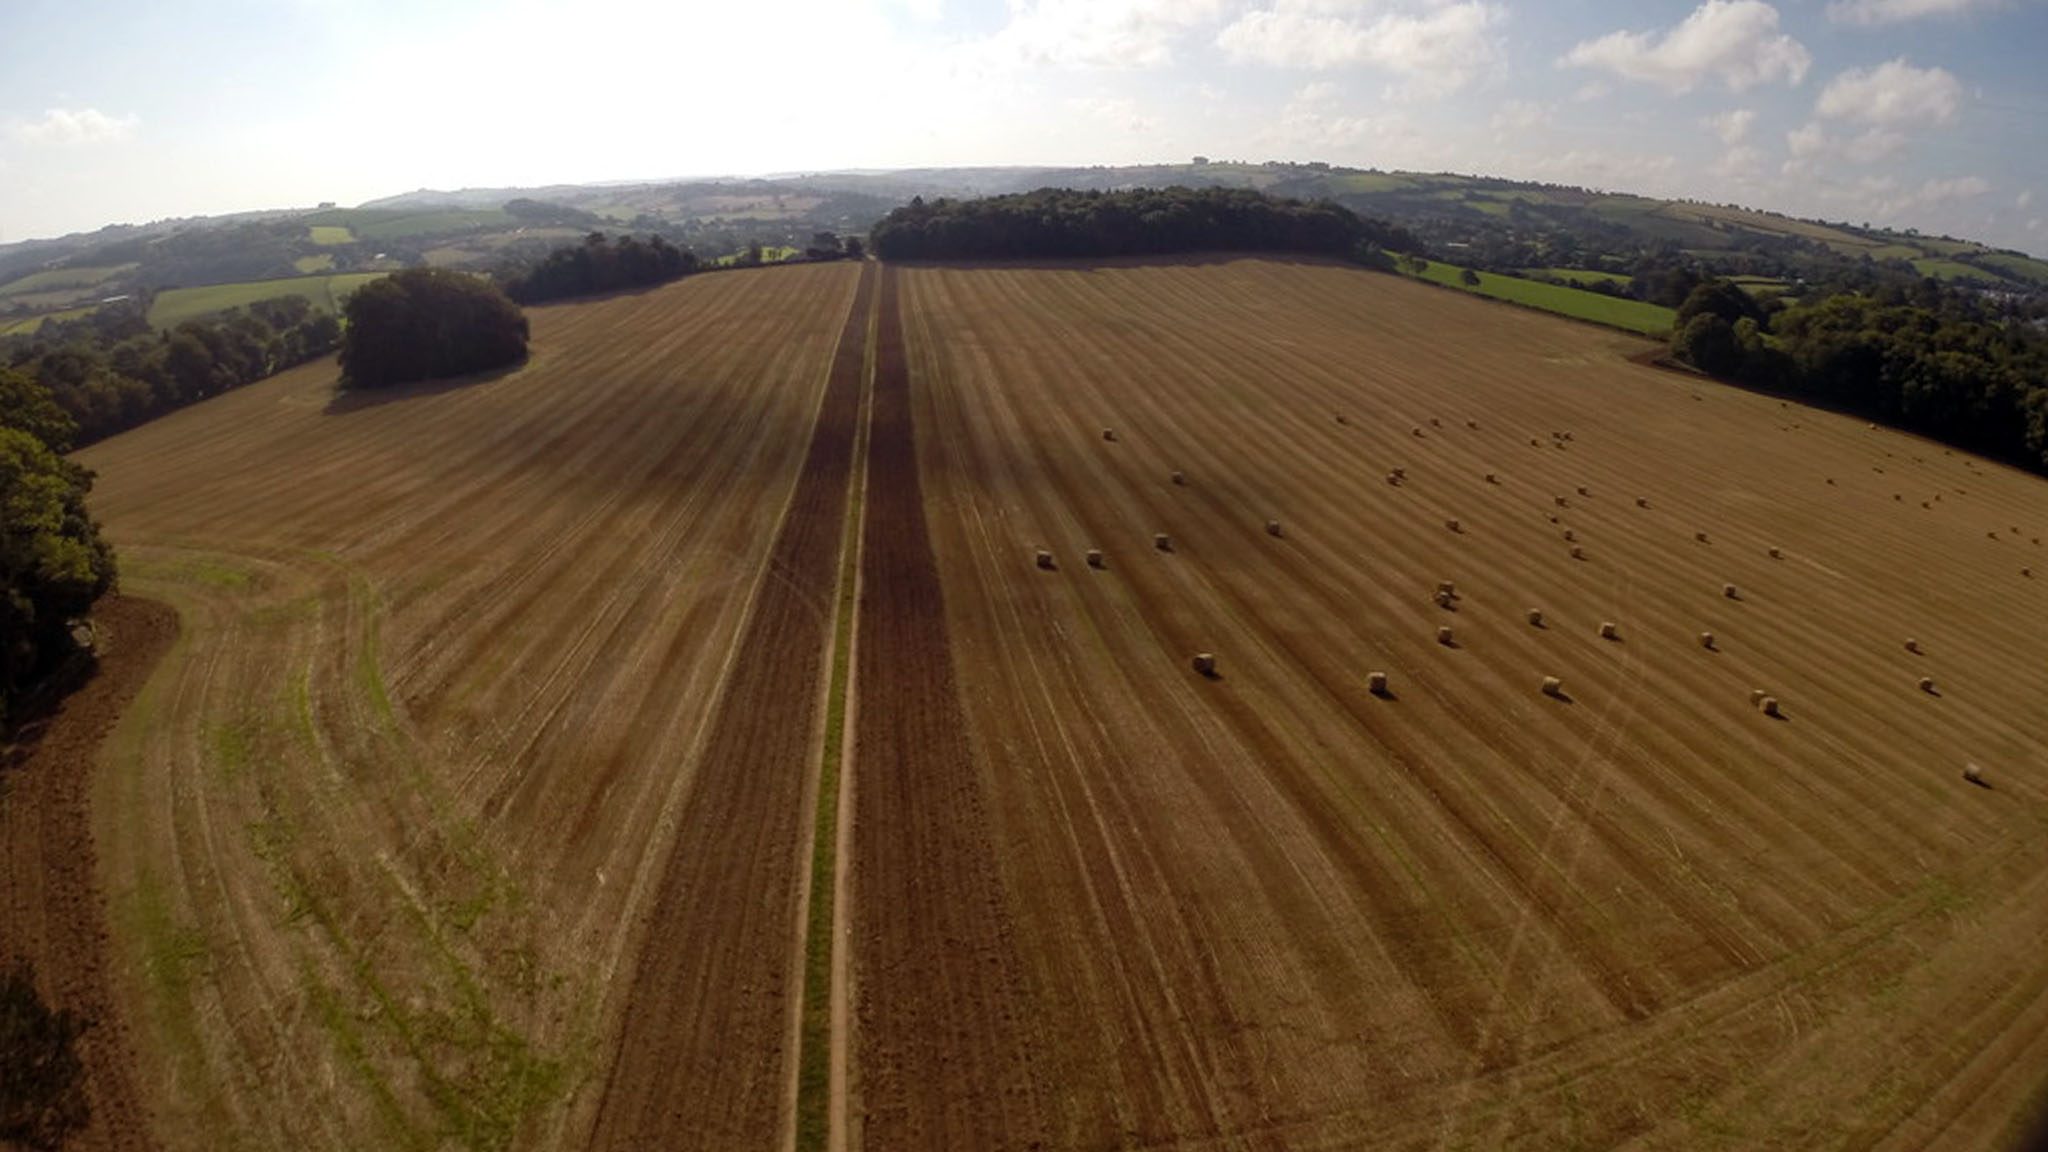 The field at Dartington proposed for agroforestry use